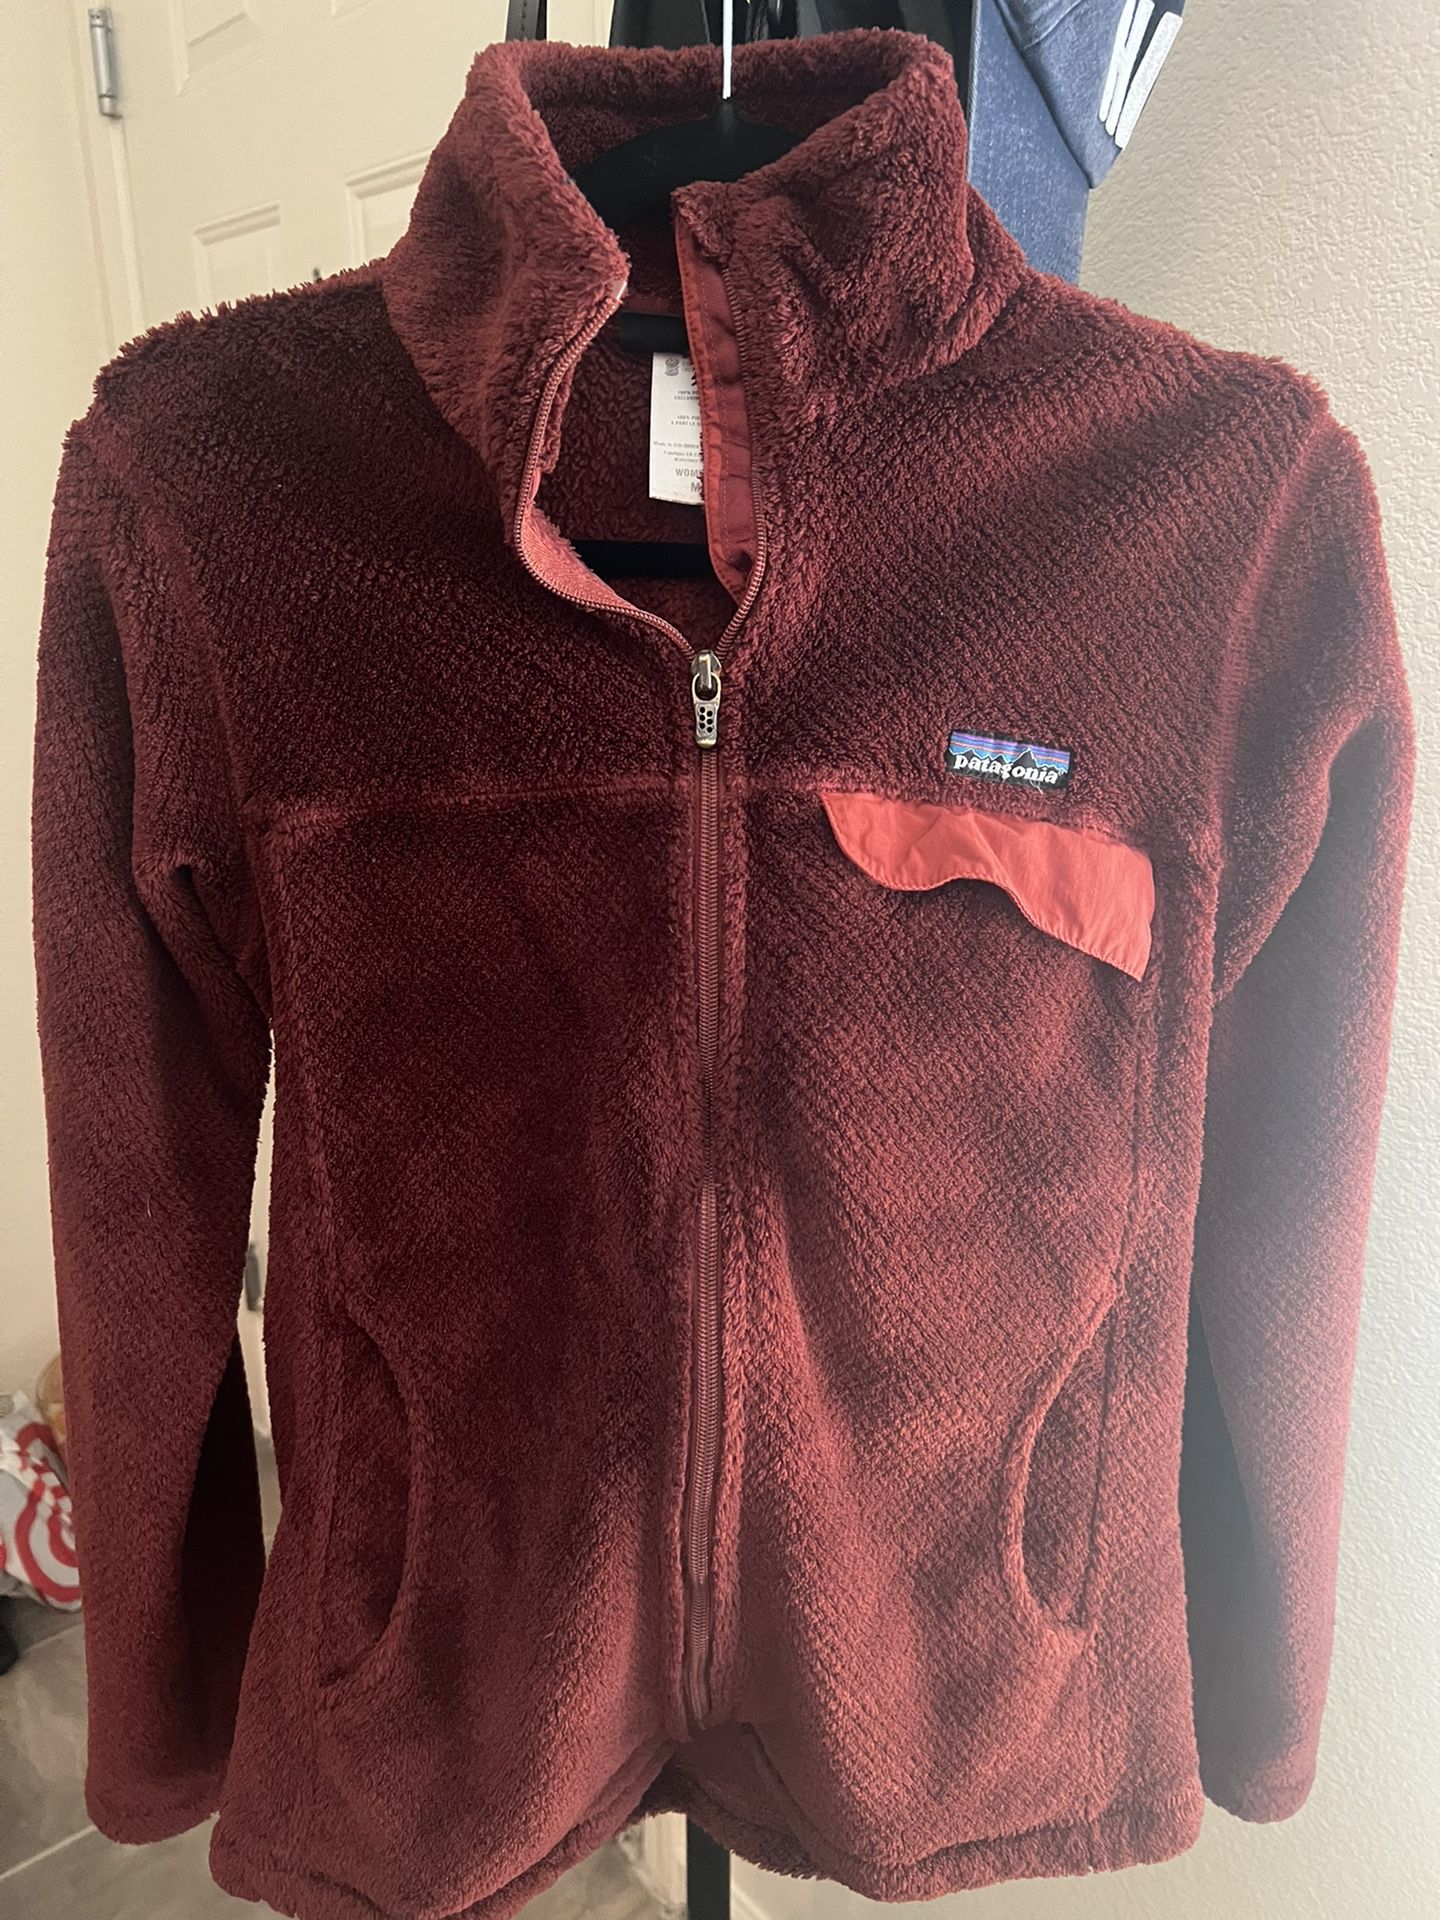 Classic womens Patagonia Sweater